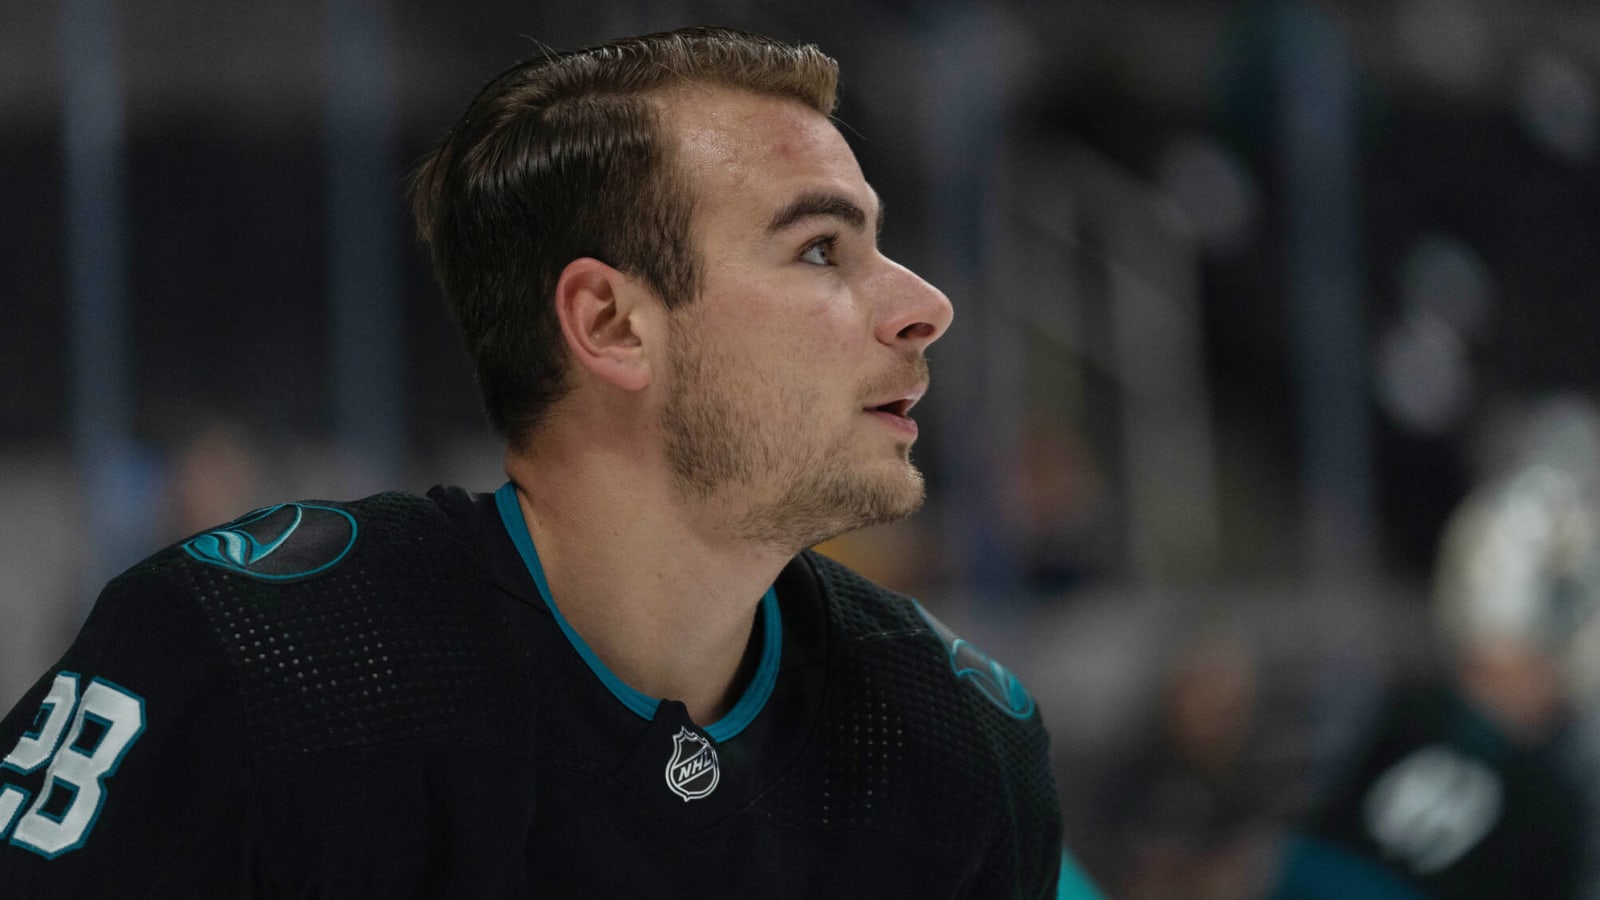 Timo Meier, Sharks have not discussed contract extension